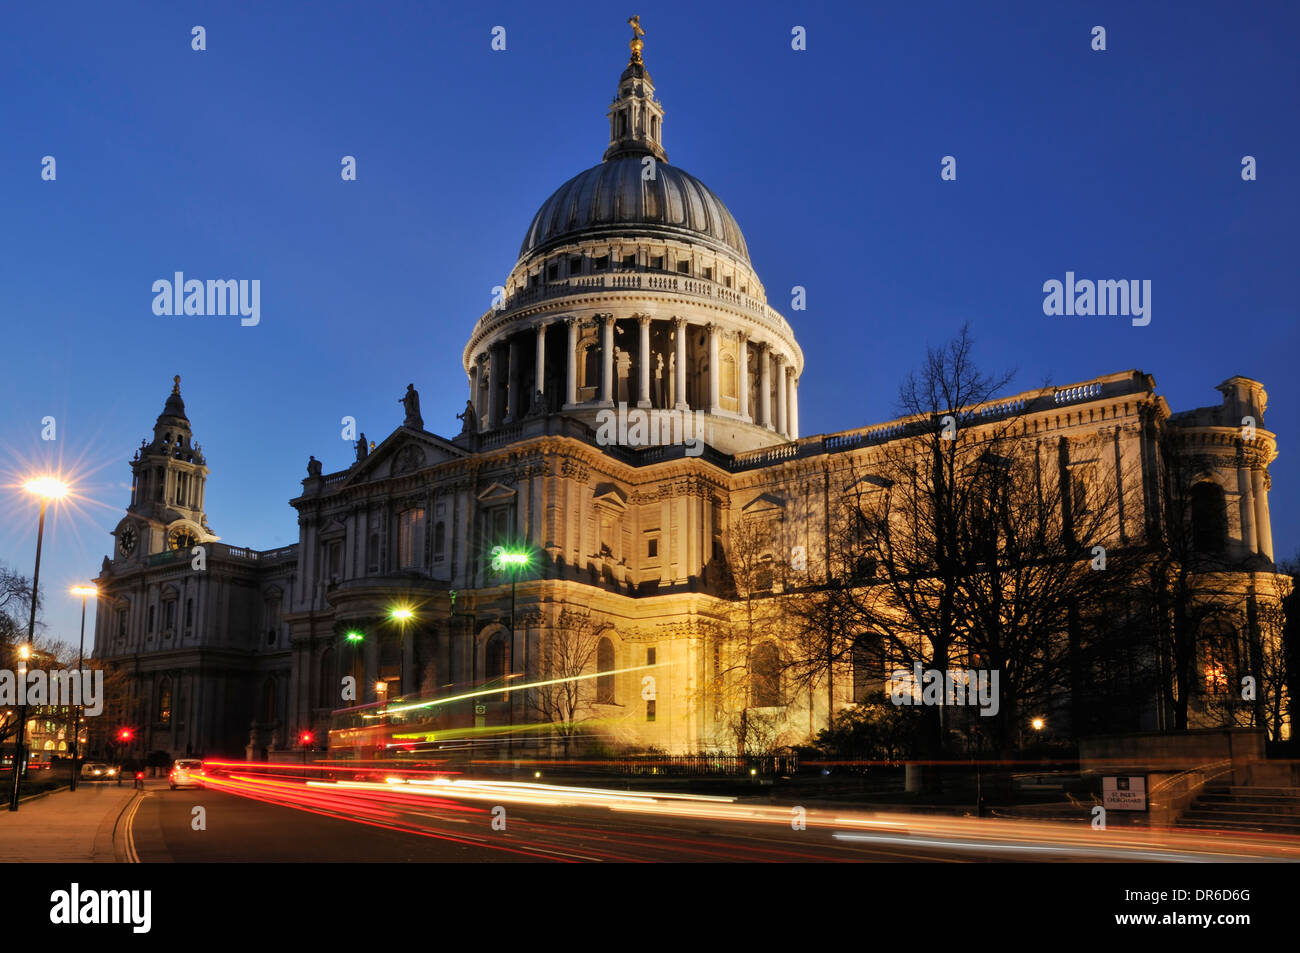 St Paul's cathedral, London UK, Illuminated in the evening, with light streaks from traffic Stock Photo